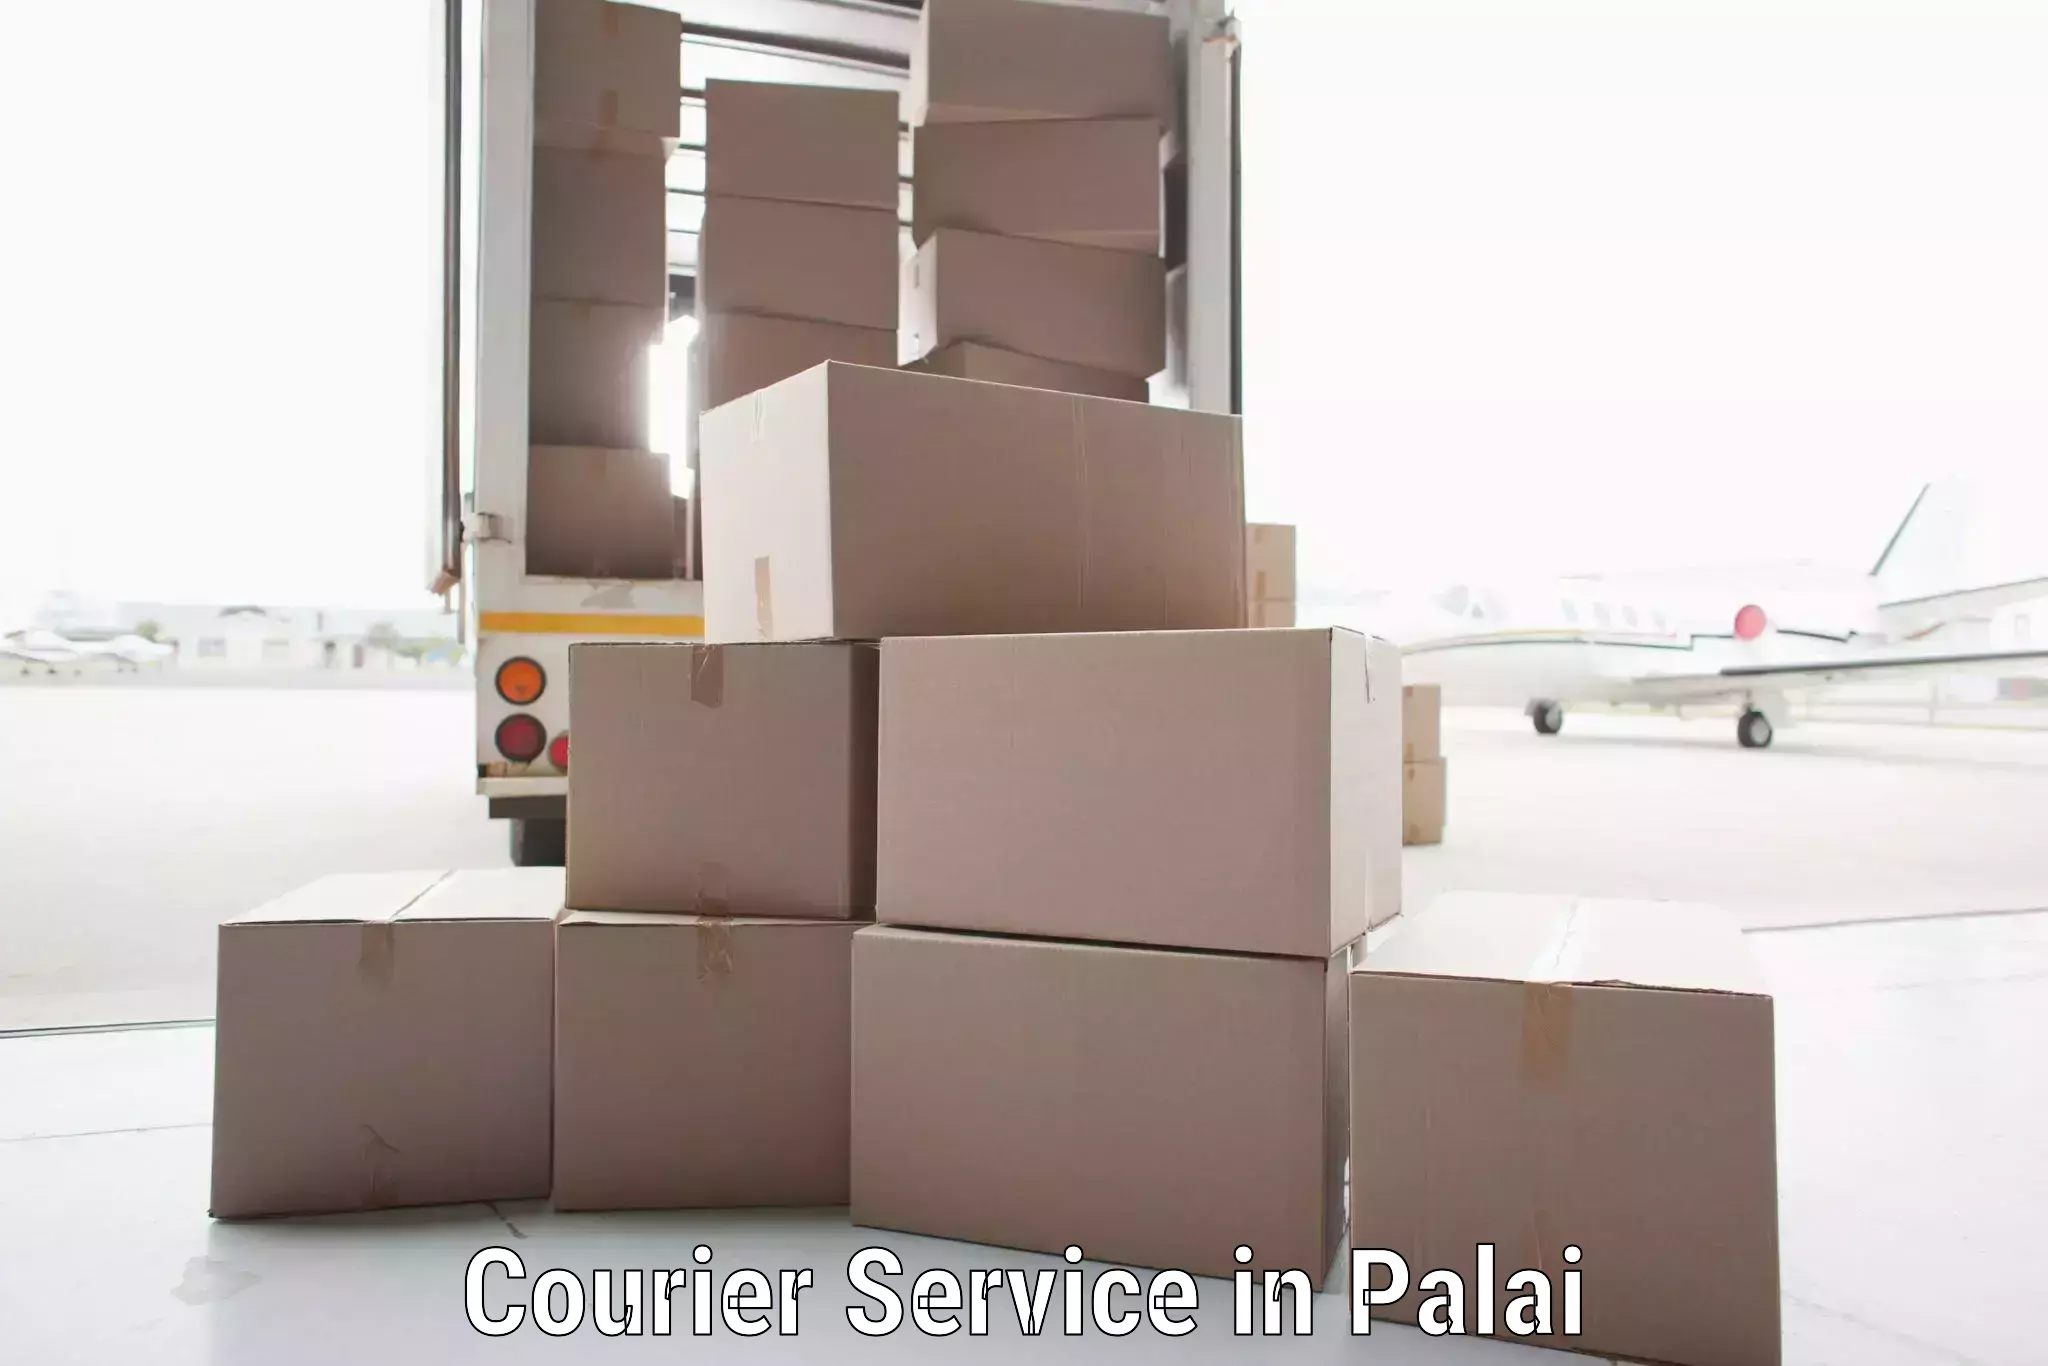 Courier rate comparison in Palai